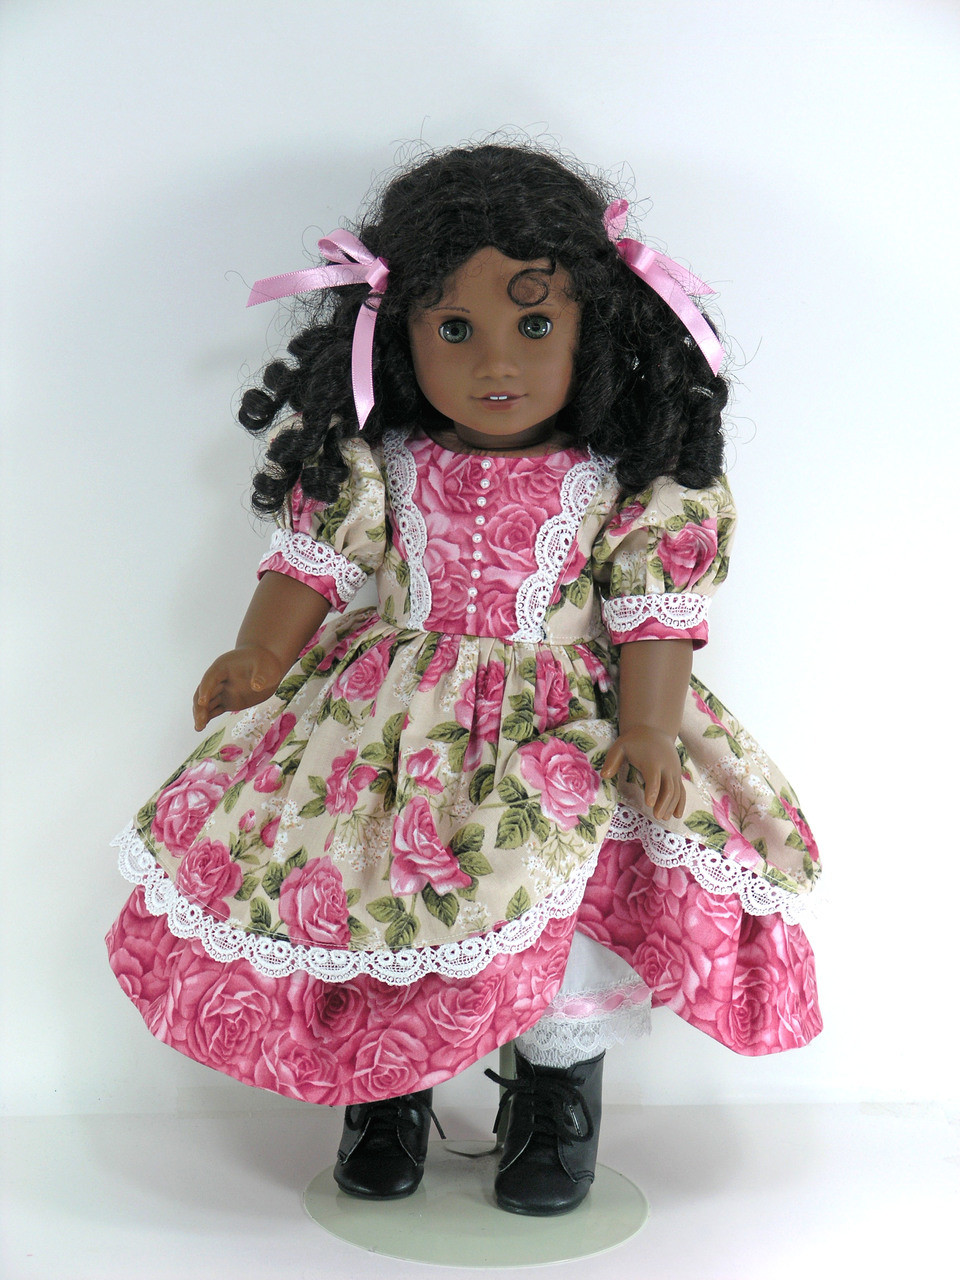 Handmade Clothes for American Doll - Dress, Headband, Pantaloons - Blue,  Pink Flowers - Exclusively Linda Doll Clothes